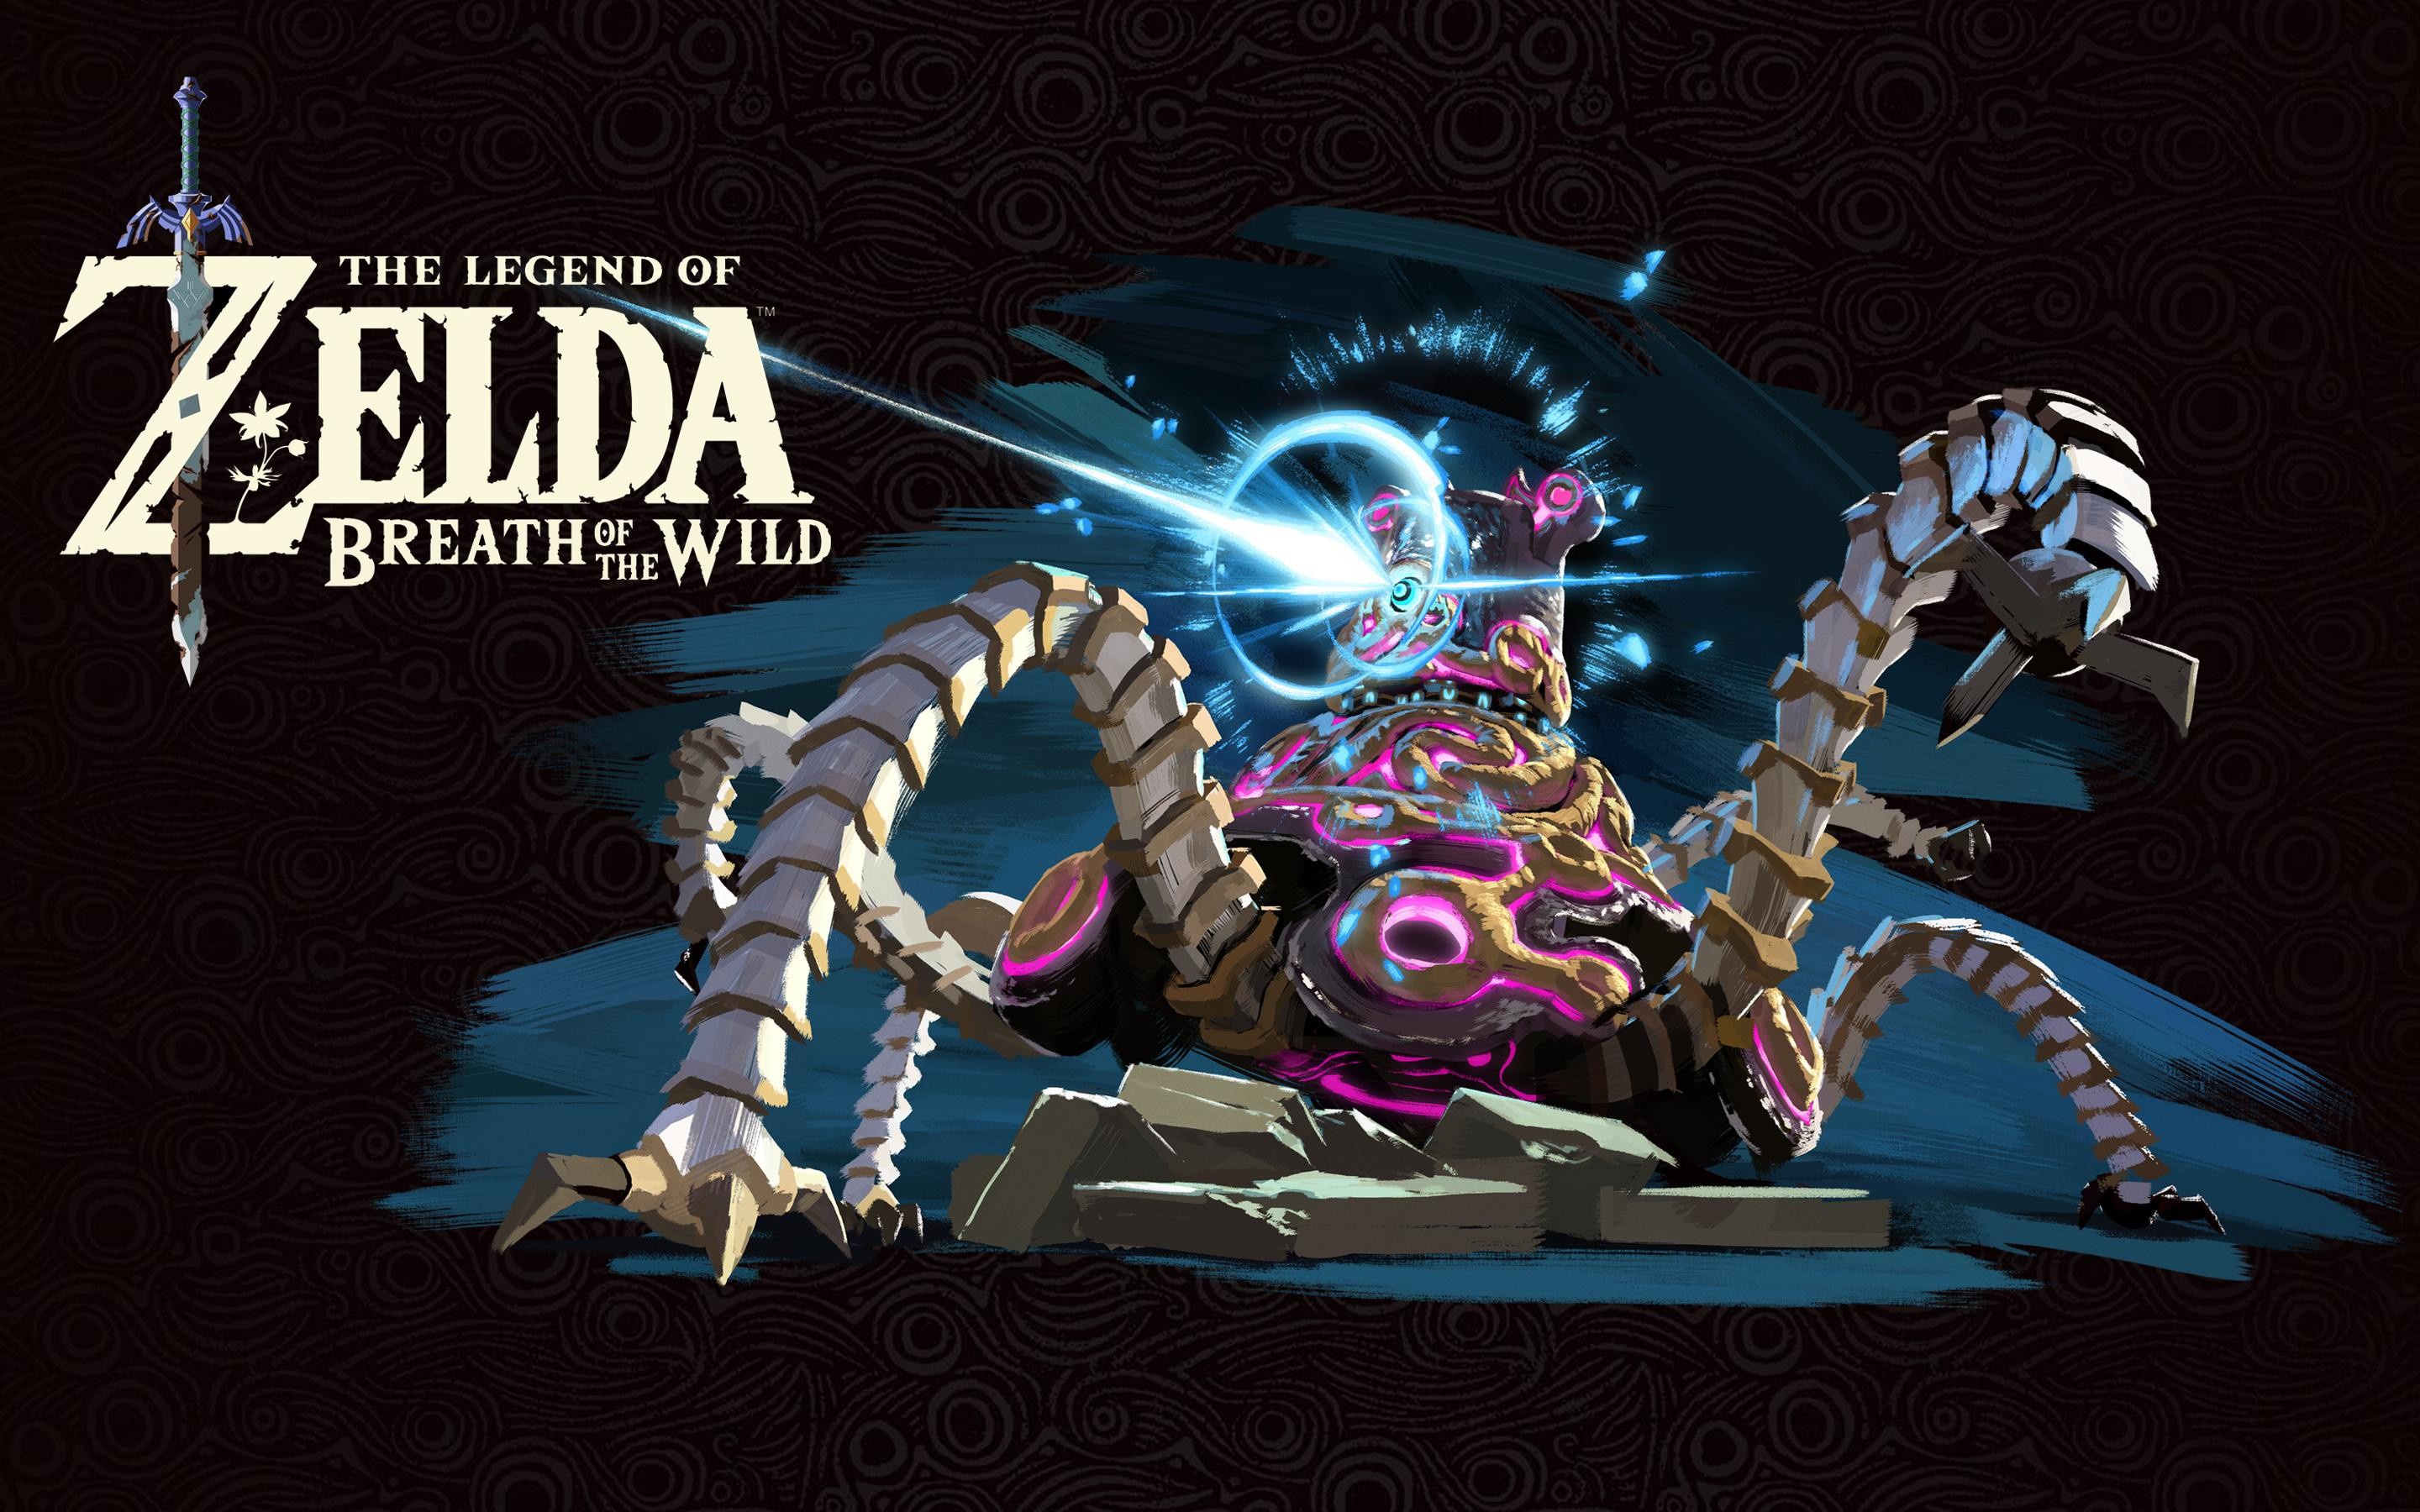 legend of zelda breath of the wild wallpaper,graphic design,fictional character,action adventure game,crab,pc game